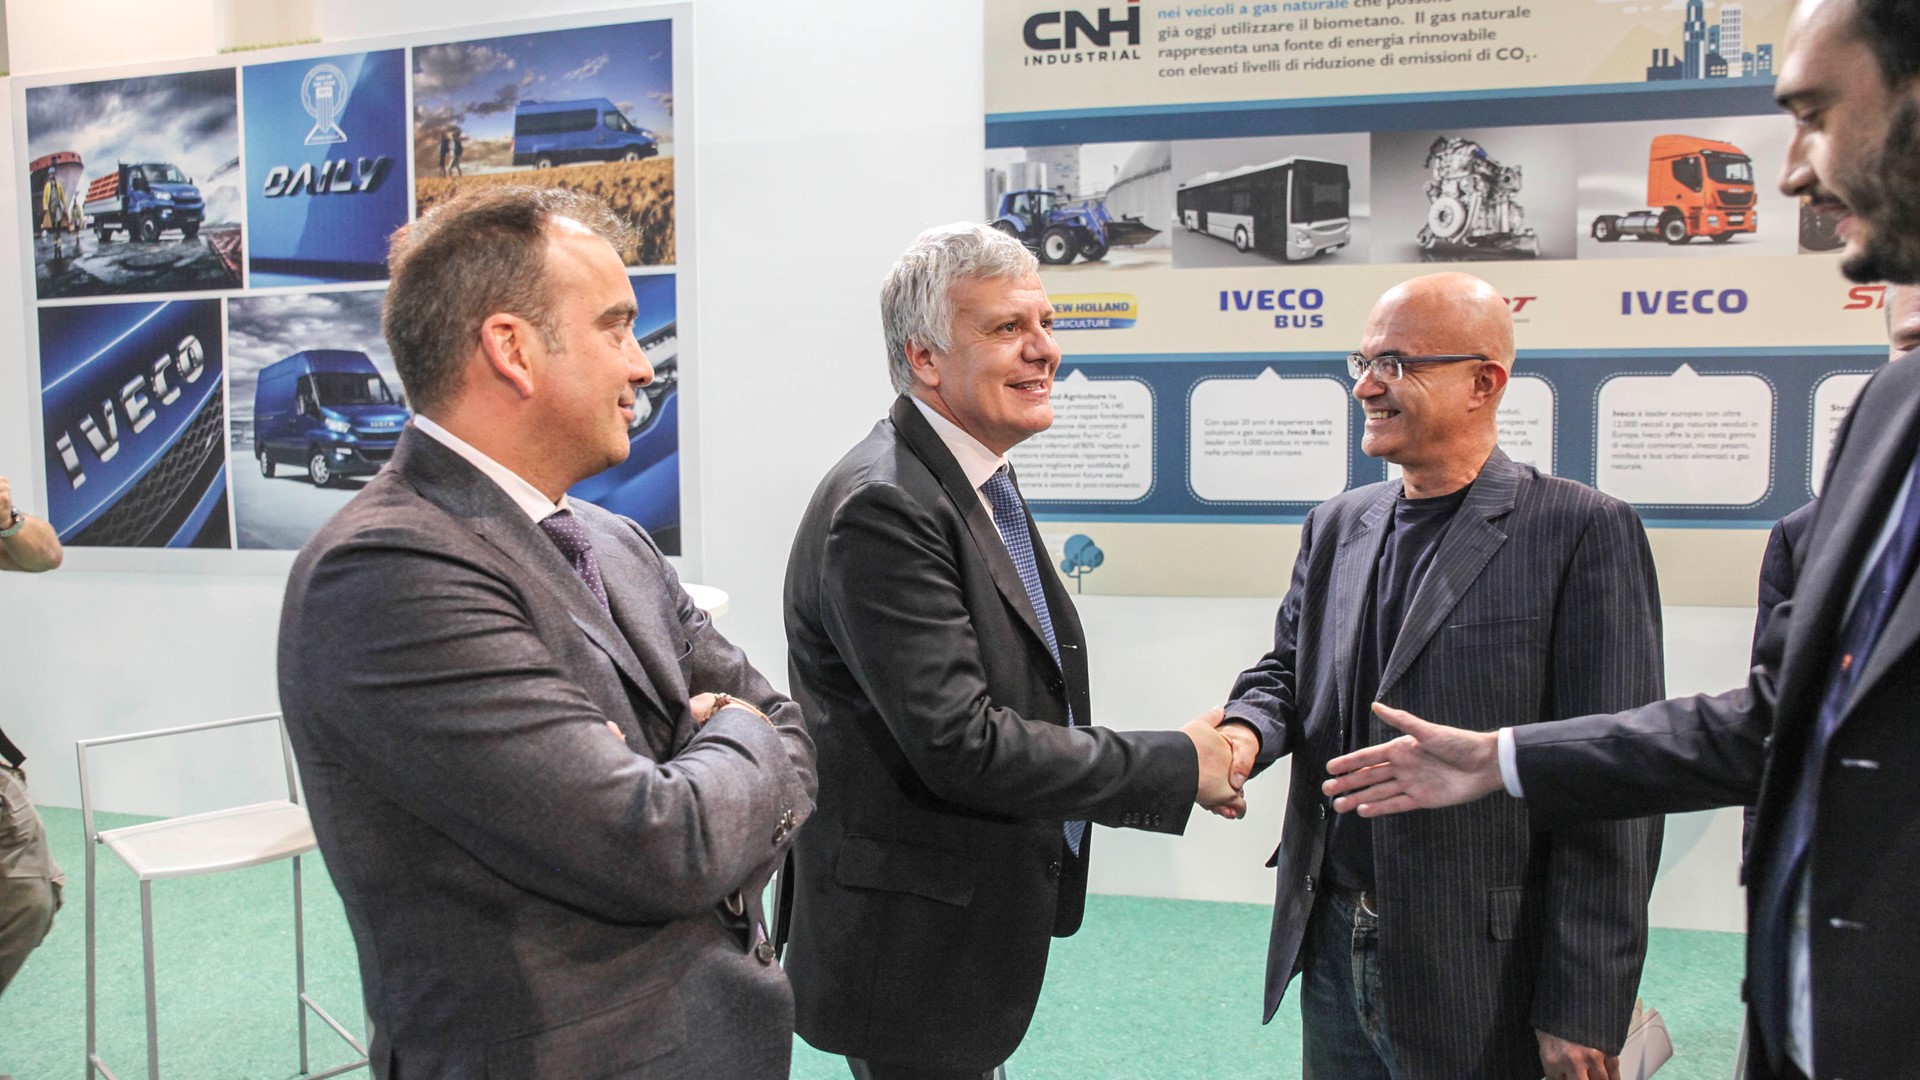 The Honourable Gian Luca Galletti, Italy's Minister of the Environment, Land and Sea, visits the CNH Industrial stand